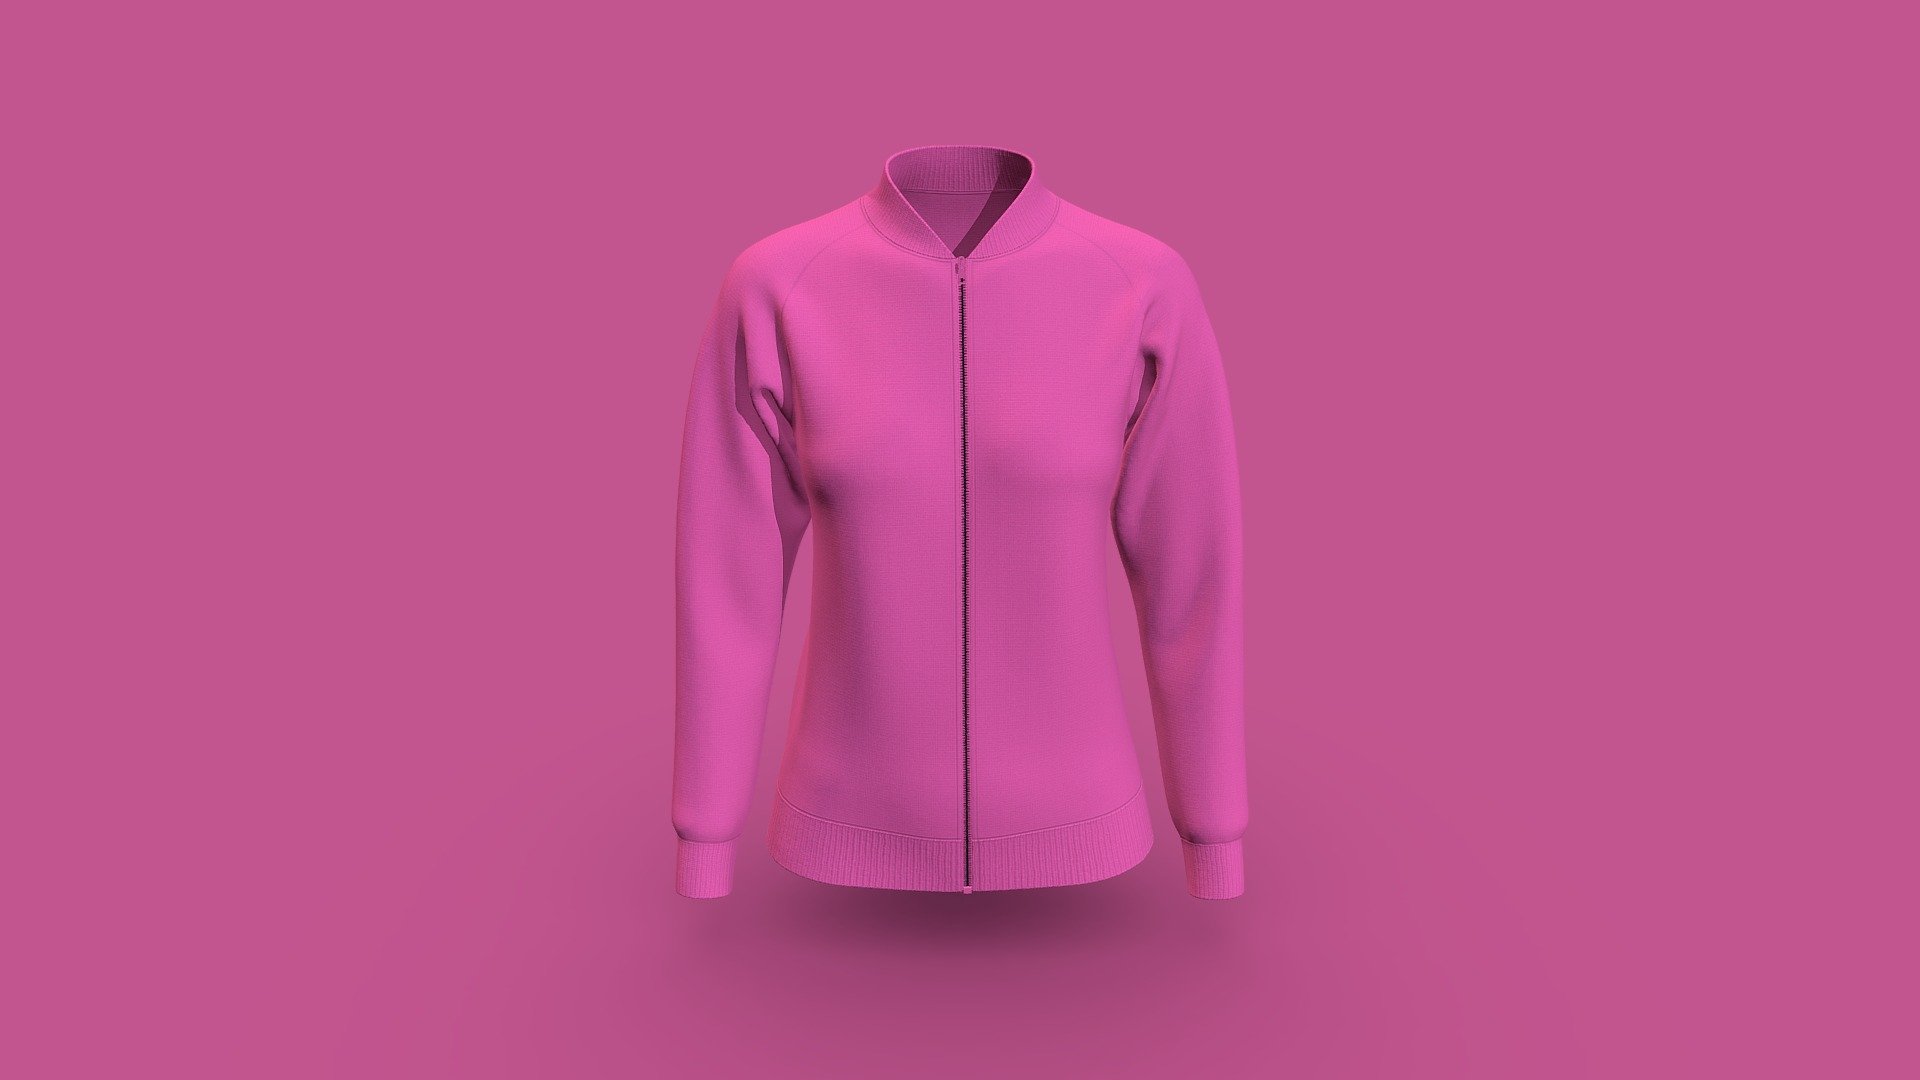 Cloth Title = Raglan Fashion Casual Slim Jacket Pink 

SKU = DG100086 

Category = Women 

Product Type = Jacket 

Cloth Length = Regular 

Body Fit = Slim Fit 

Occasion = Outerwear 

Sleeve Style = Raglan Sleeve 


Our Services:

3D Apparel Design.

OBJ,FBX,GLTF Making with High/Low Poly.

Fabric Digitalization.

Mockup making.

3D Teck Pack.

Pattern Making.

2D Illustration.

Cloth Animation and 360 Spin Video.


Contact us:- 

Email: info@digitalfashionwear.com 

Website: https://digitalfashionwear.com 


We designed all the types of cloth specially focused on product visualization, e-commerce, fitting, and production. 

We will design: 

T-shirts 

Polo shirts 

Hoodies 

Sweatshirt 

Jackets 

Shirts 

TankTops 

Trousers 

Bras 

Underwear 

Blazer 

Aprons 

Leggings 

and All Fashion items. 





Our goal is to make sure what we provide you, meets your demand 3d model